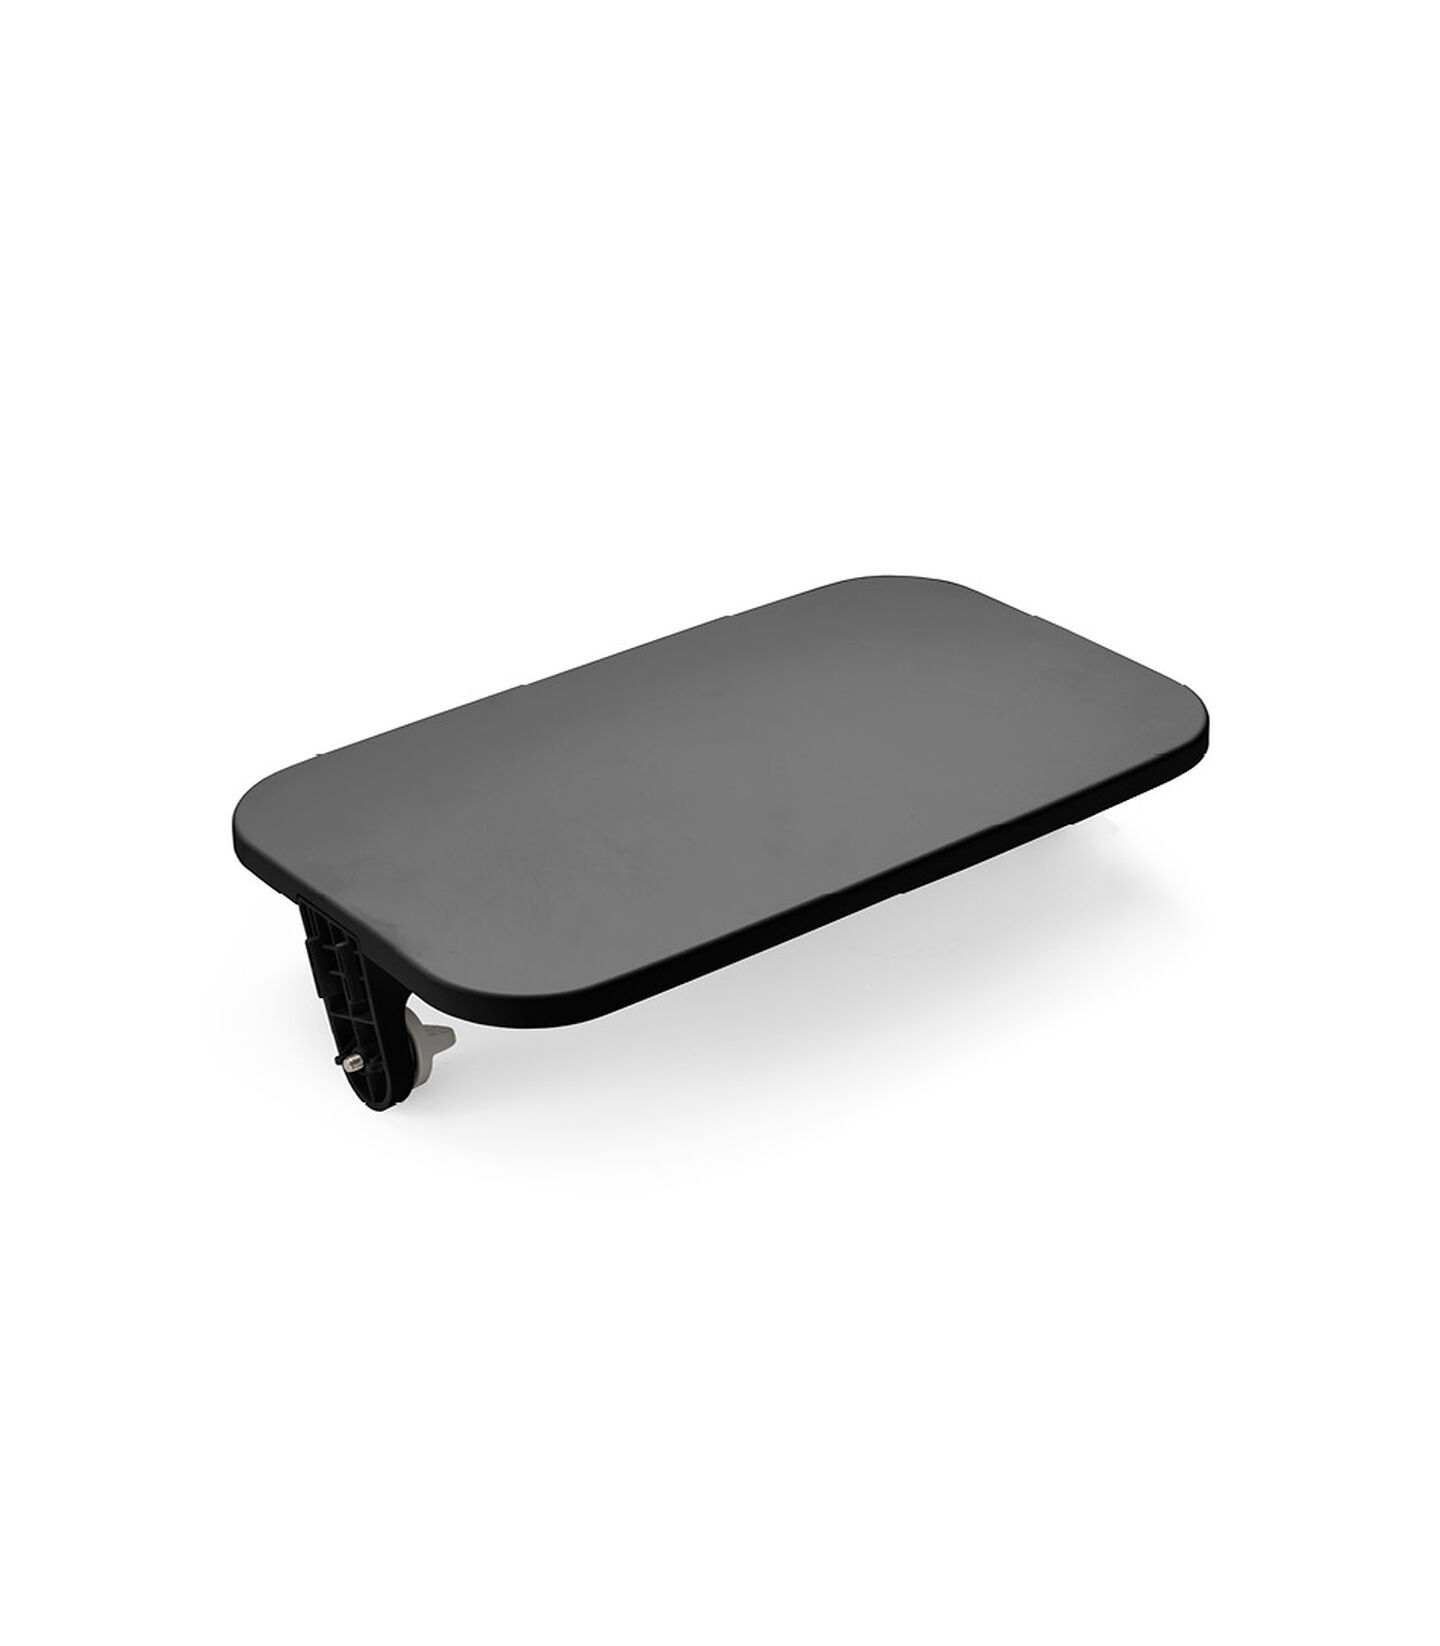 Stokke® Steps™ Chair Footrest Black, Nero, mainview view 1